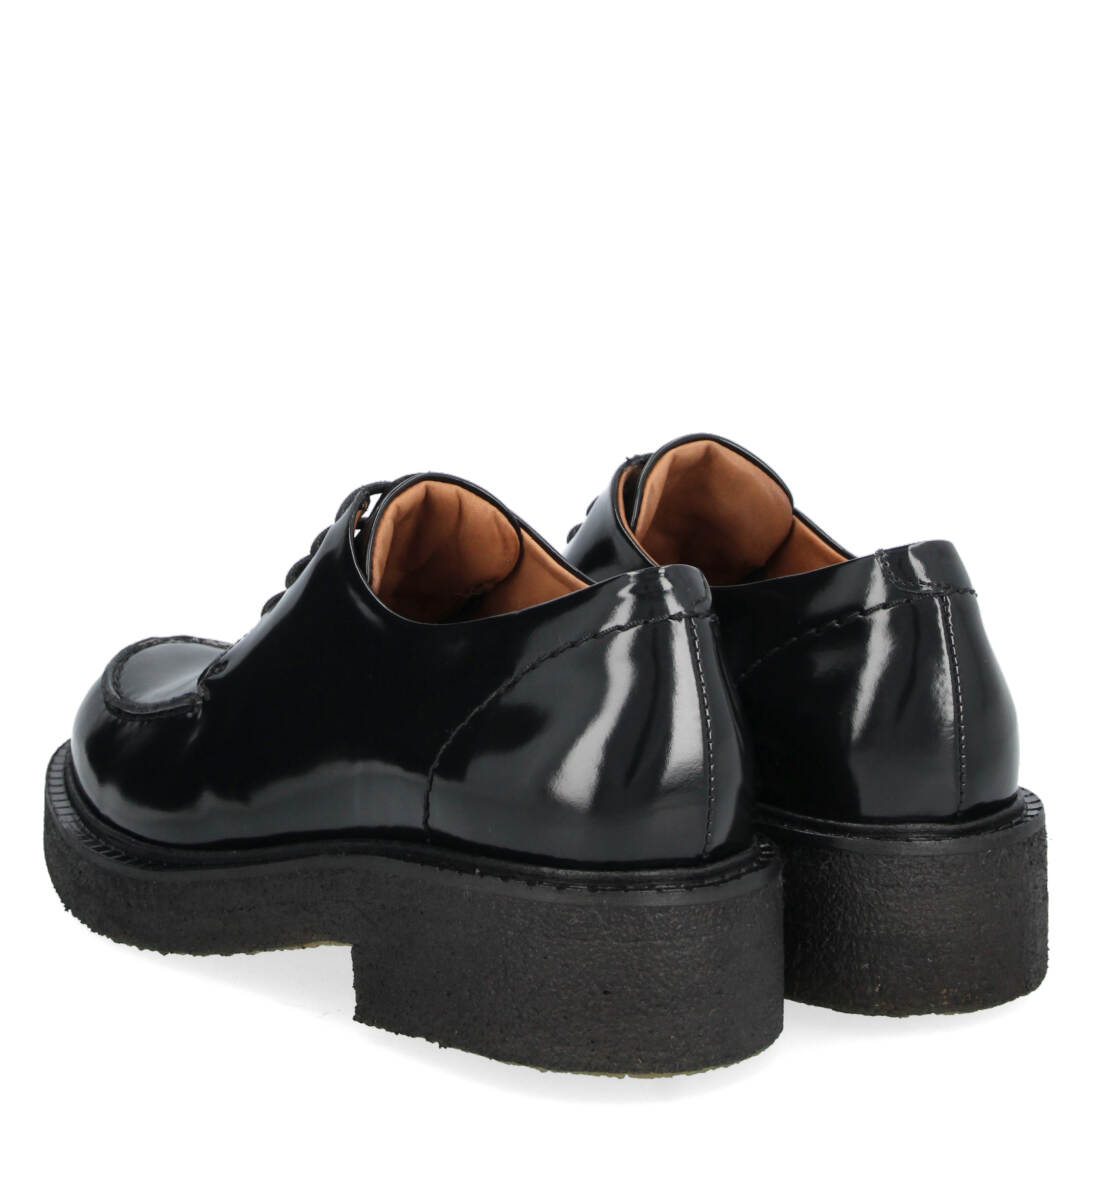 A3012 Loafers, Black Polido, 36